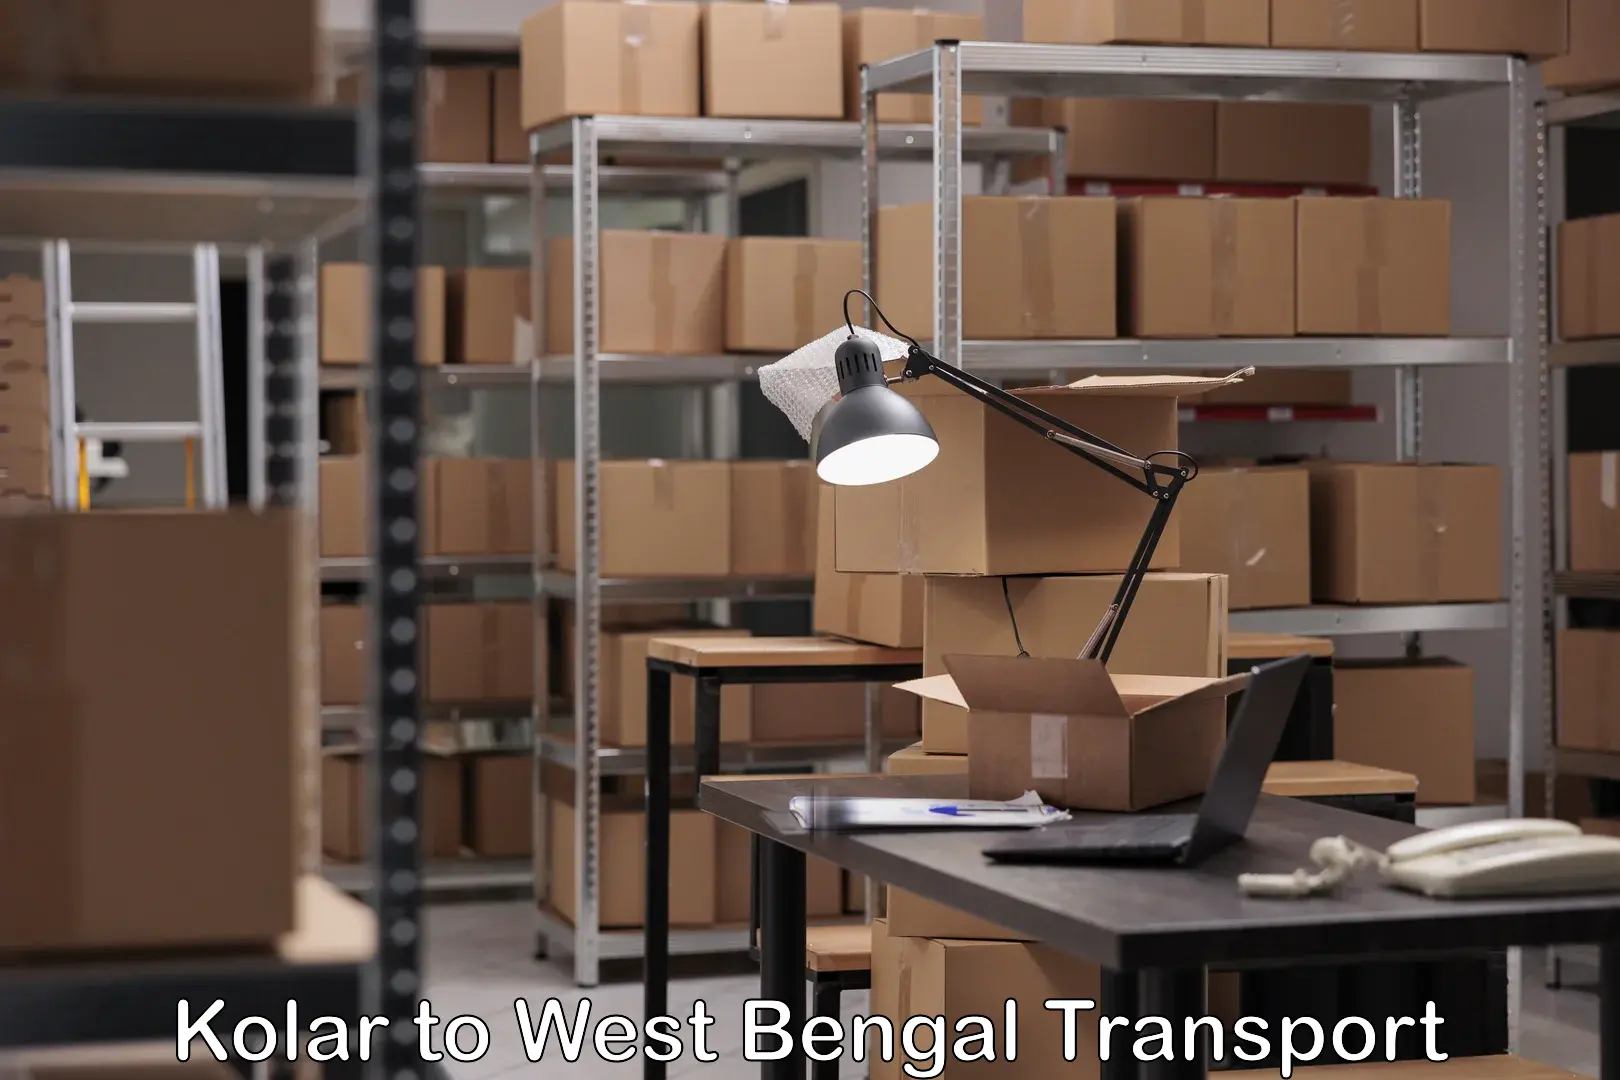 Delivery service Kolar to West Bengal